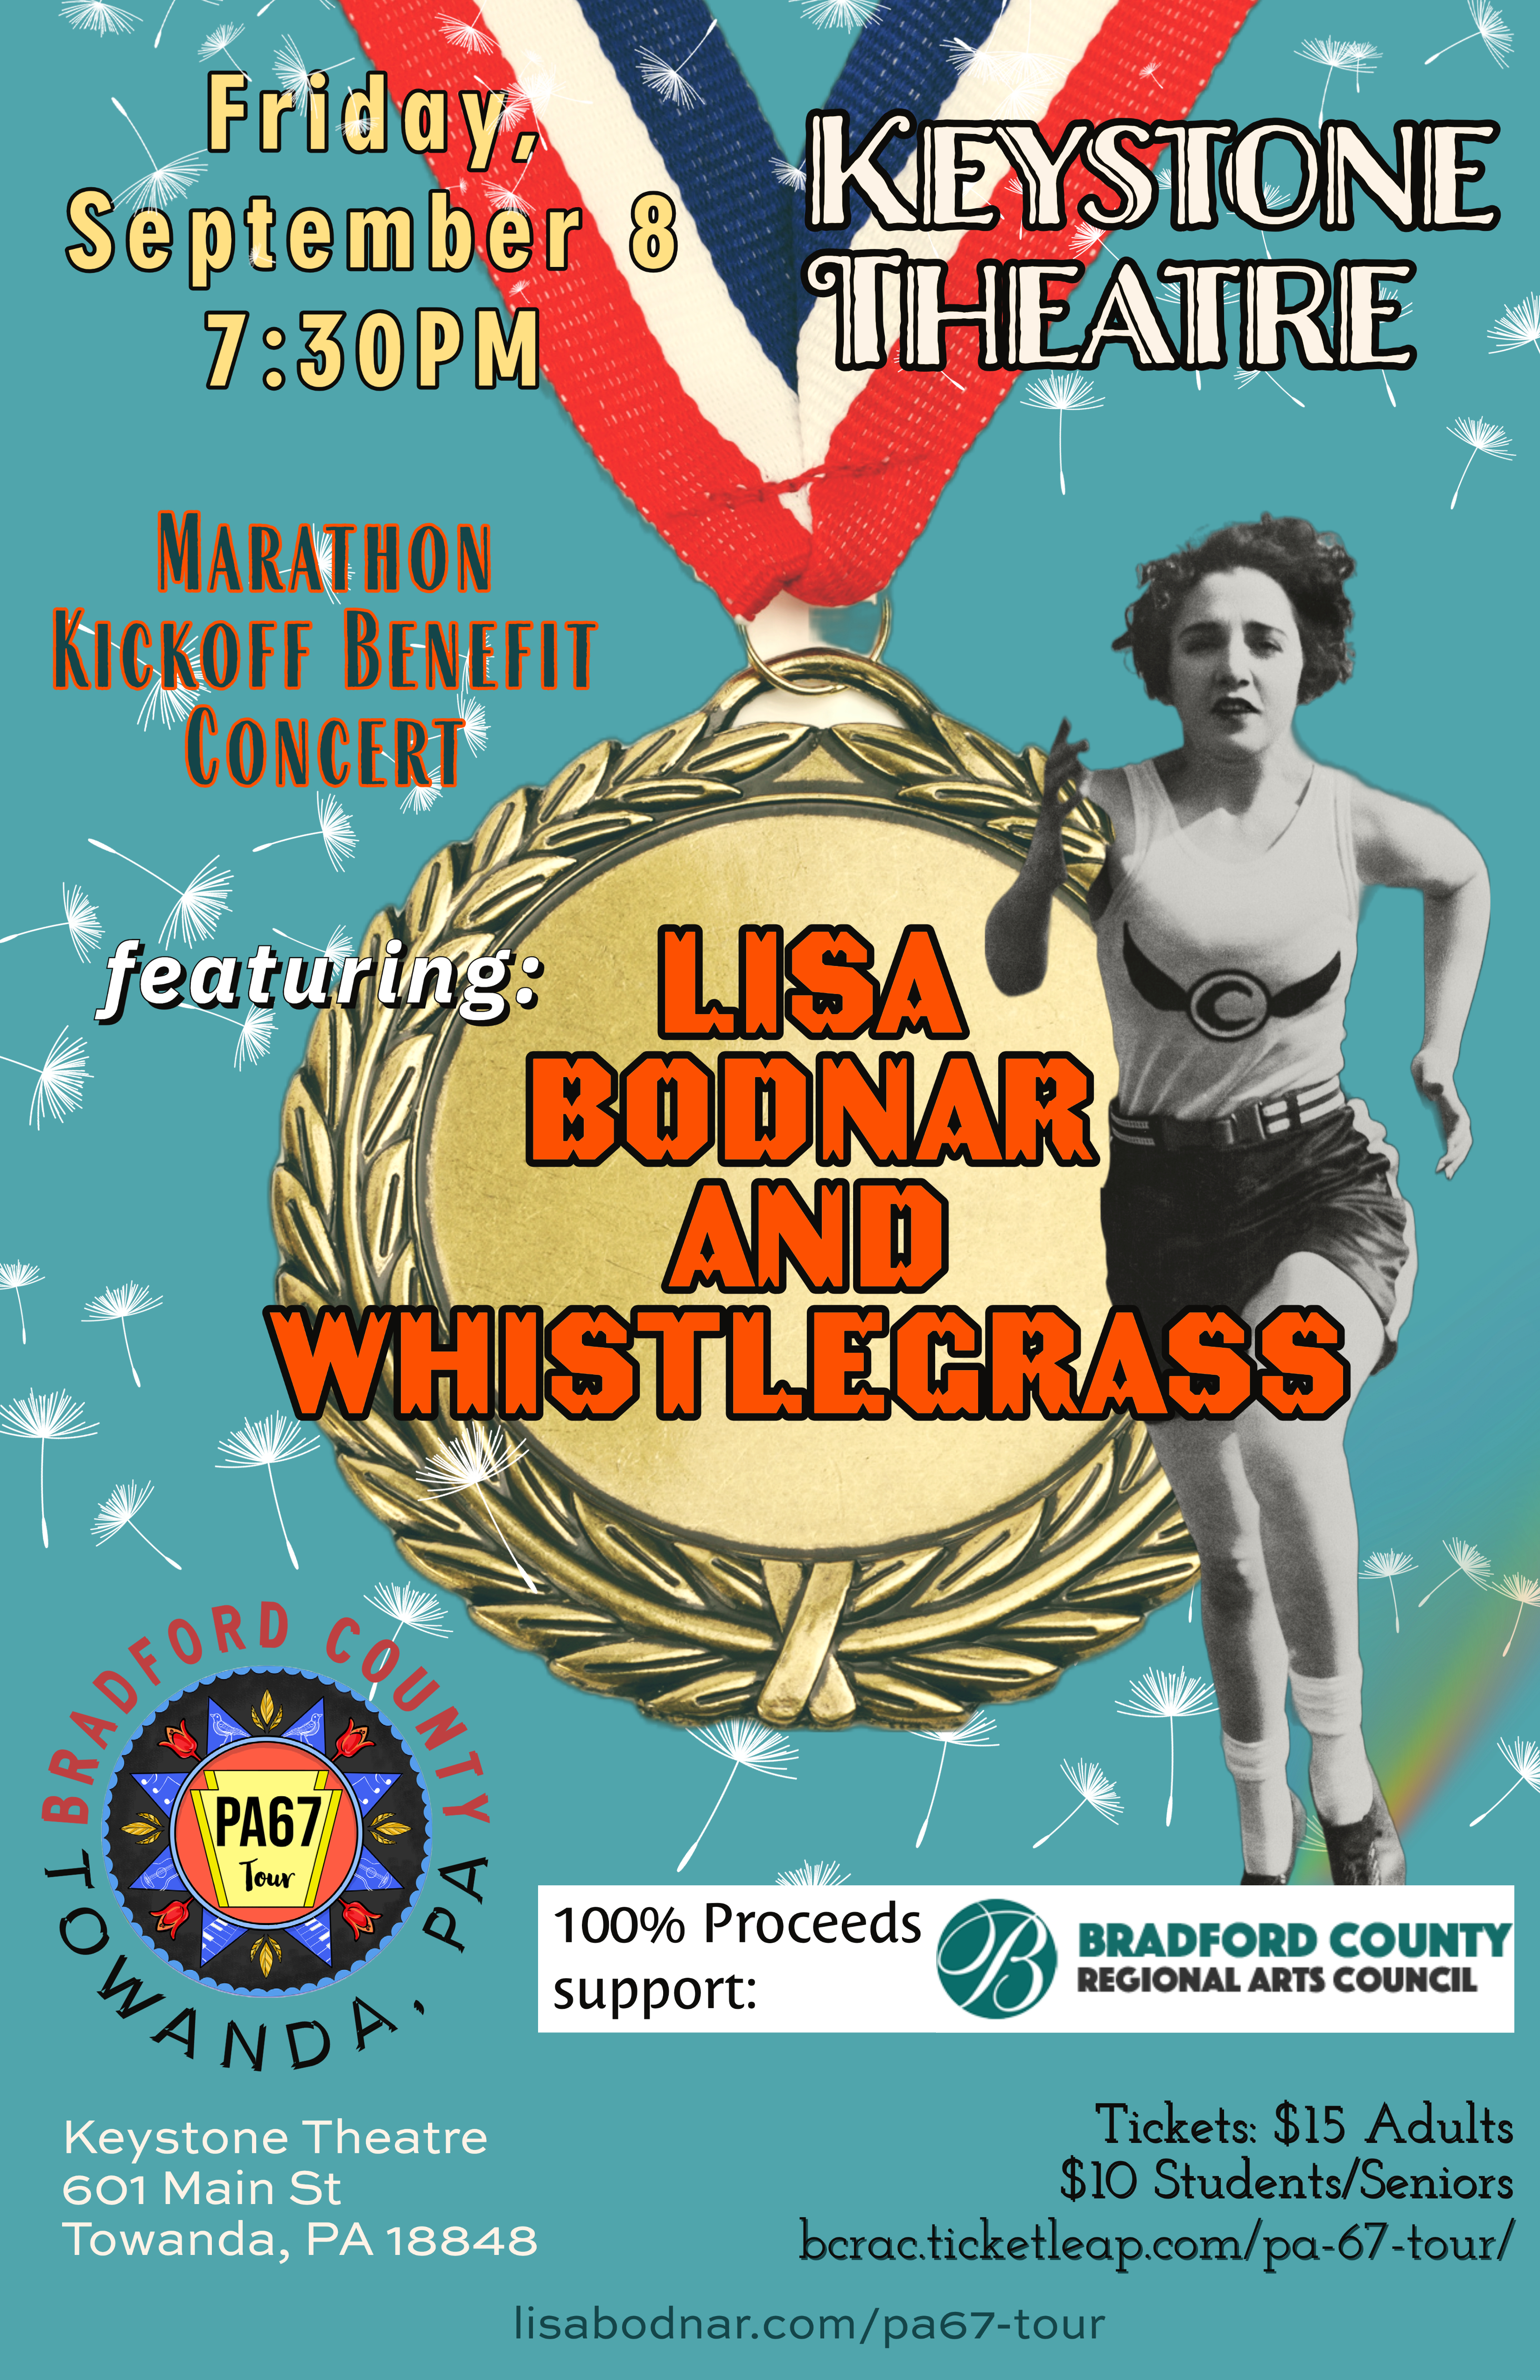 Lisa Bodnar and Whistlegrass PA67 Tour Comes to Bradford County's Keystone Theatre on September 8 for a Marathon Kickoff Concert Benefitting the Bradford County Regional Arts Council